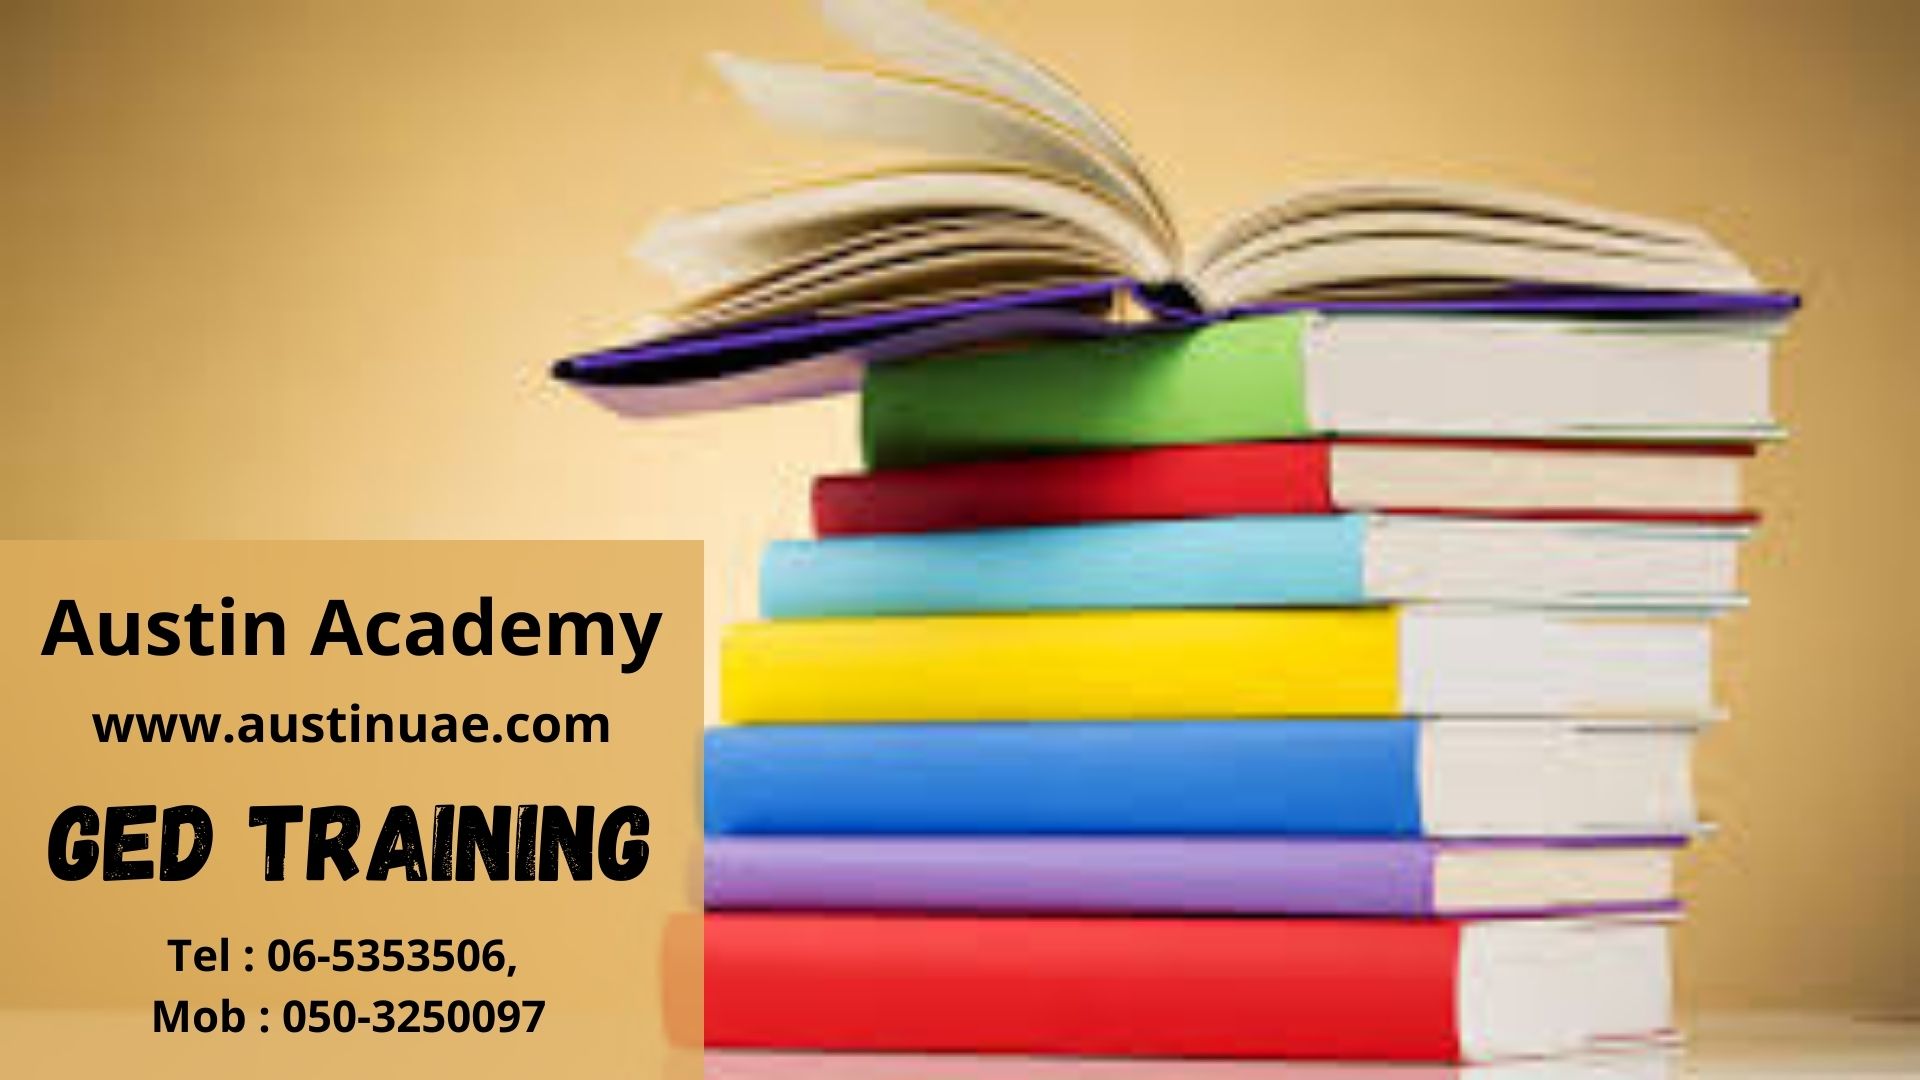 Ged Classes In Sharjah With Best Offer 0588197415